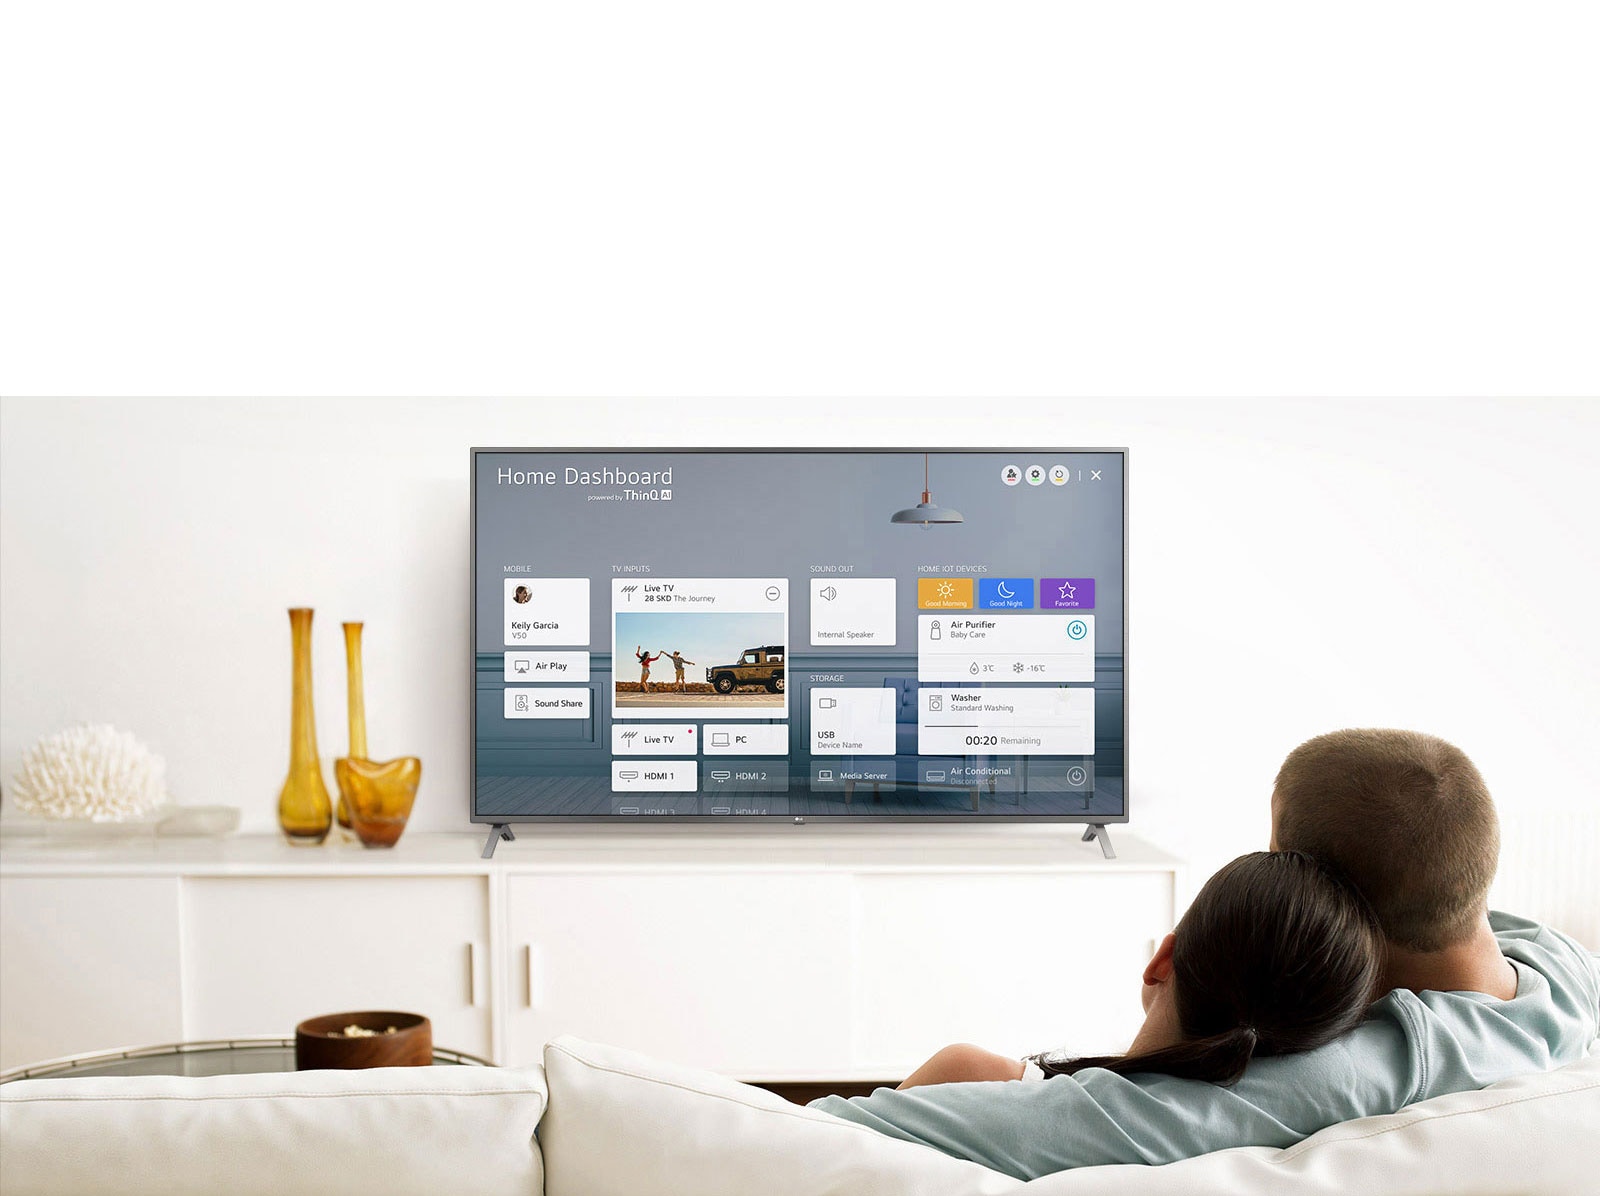 A women sitting on a sofa in the living room with the Home Dashboard on the TV screen